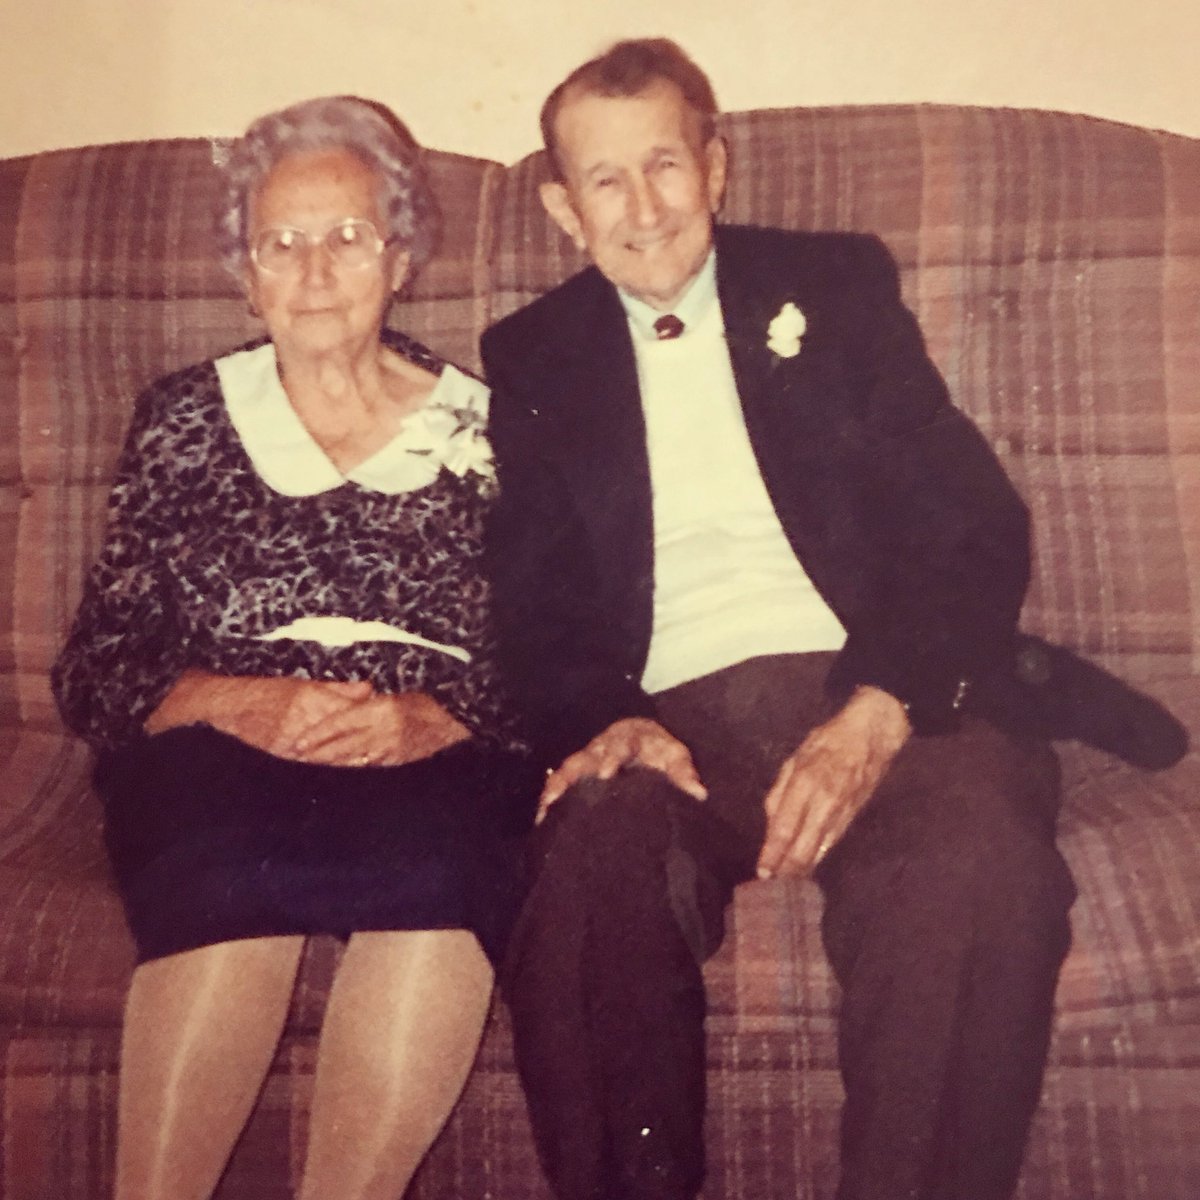 This is my great-grandfather with my great-grandmother on their 65th wedding anniversary. I was 9 when he died.